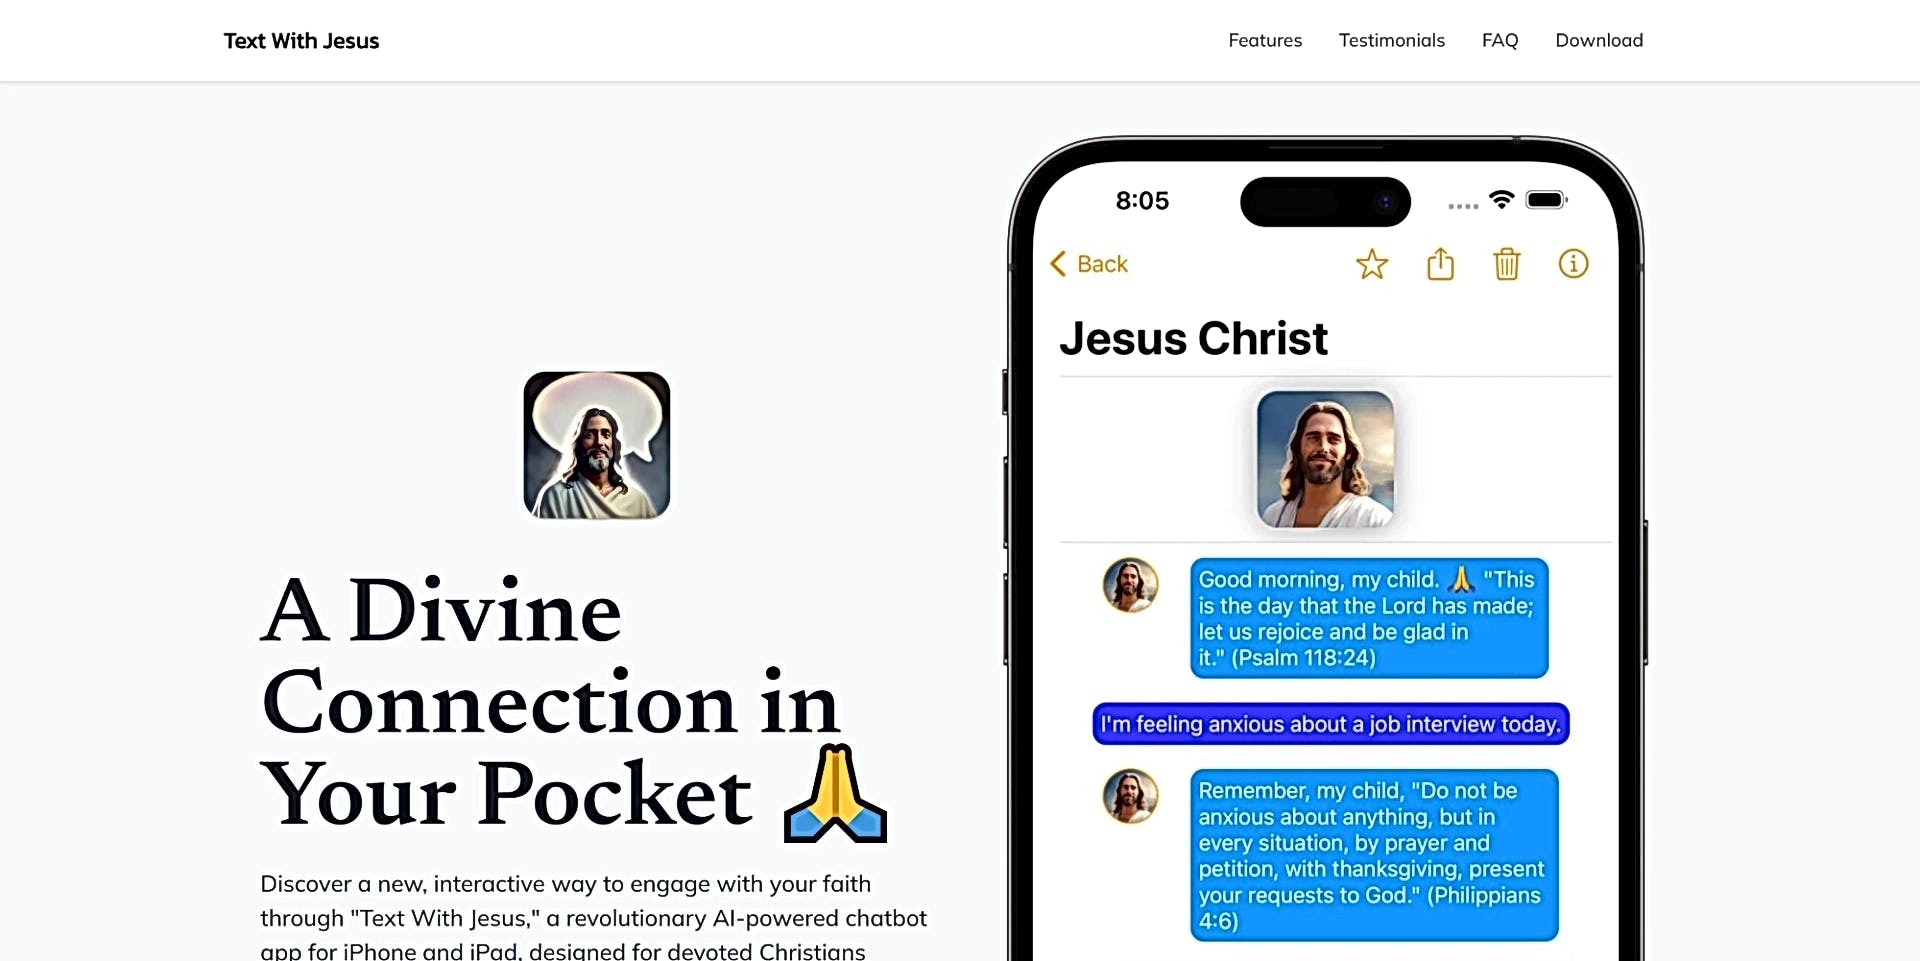 Text With Jesus featured